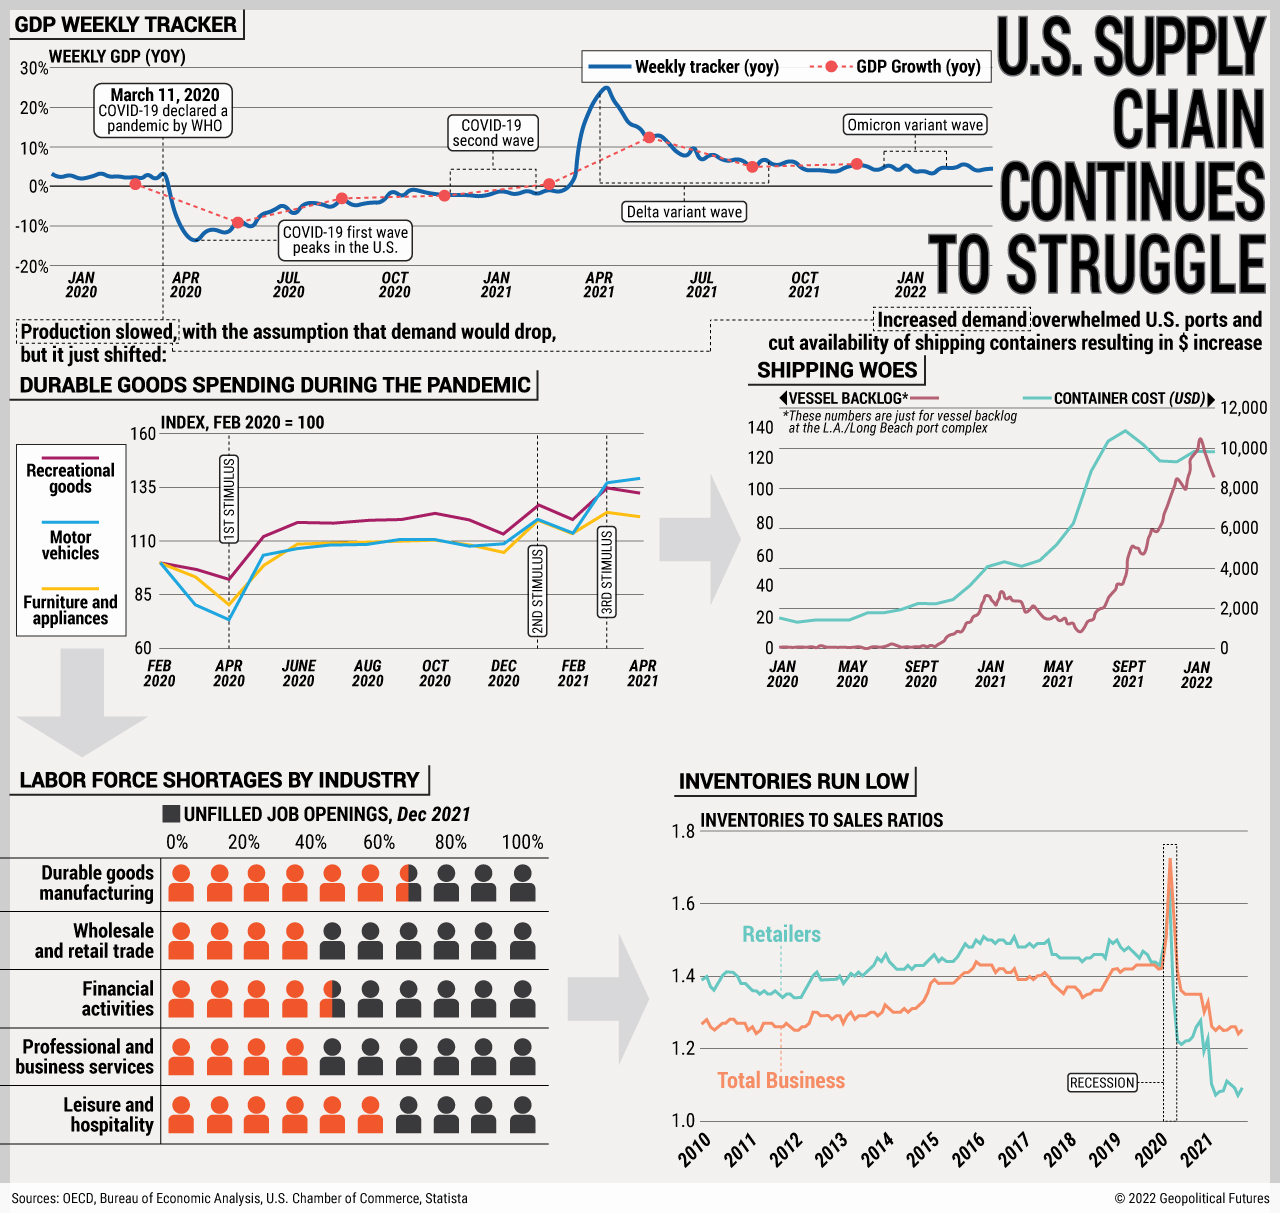 U.S. Supply Chain Continues to Struggle